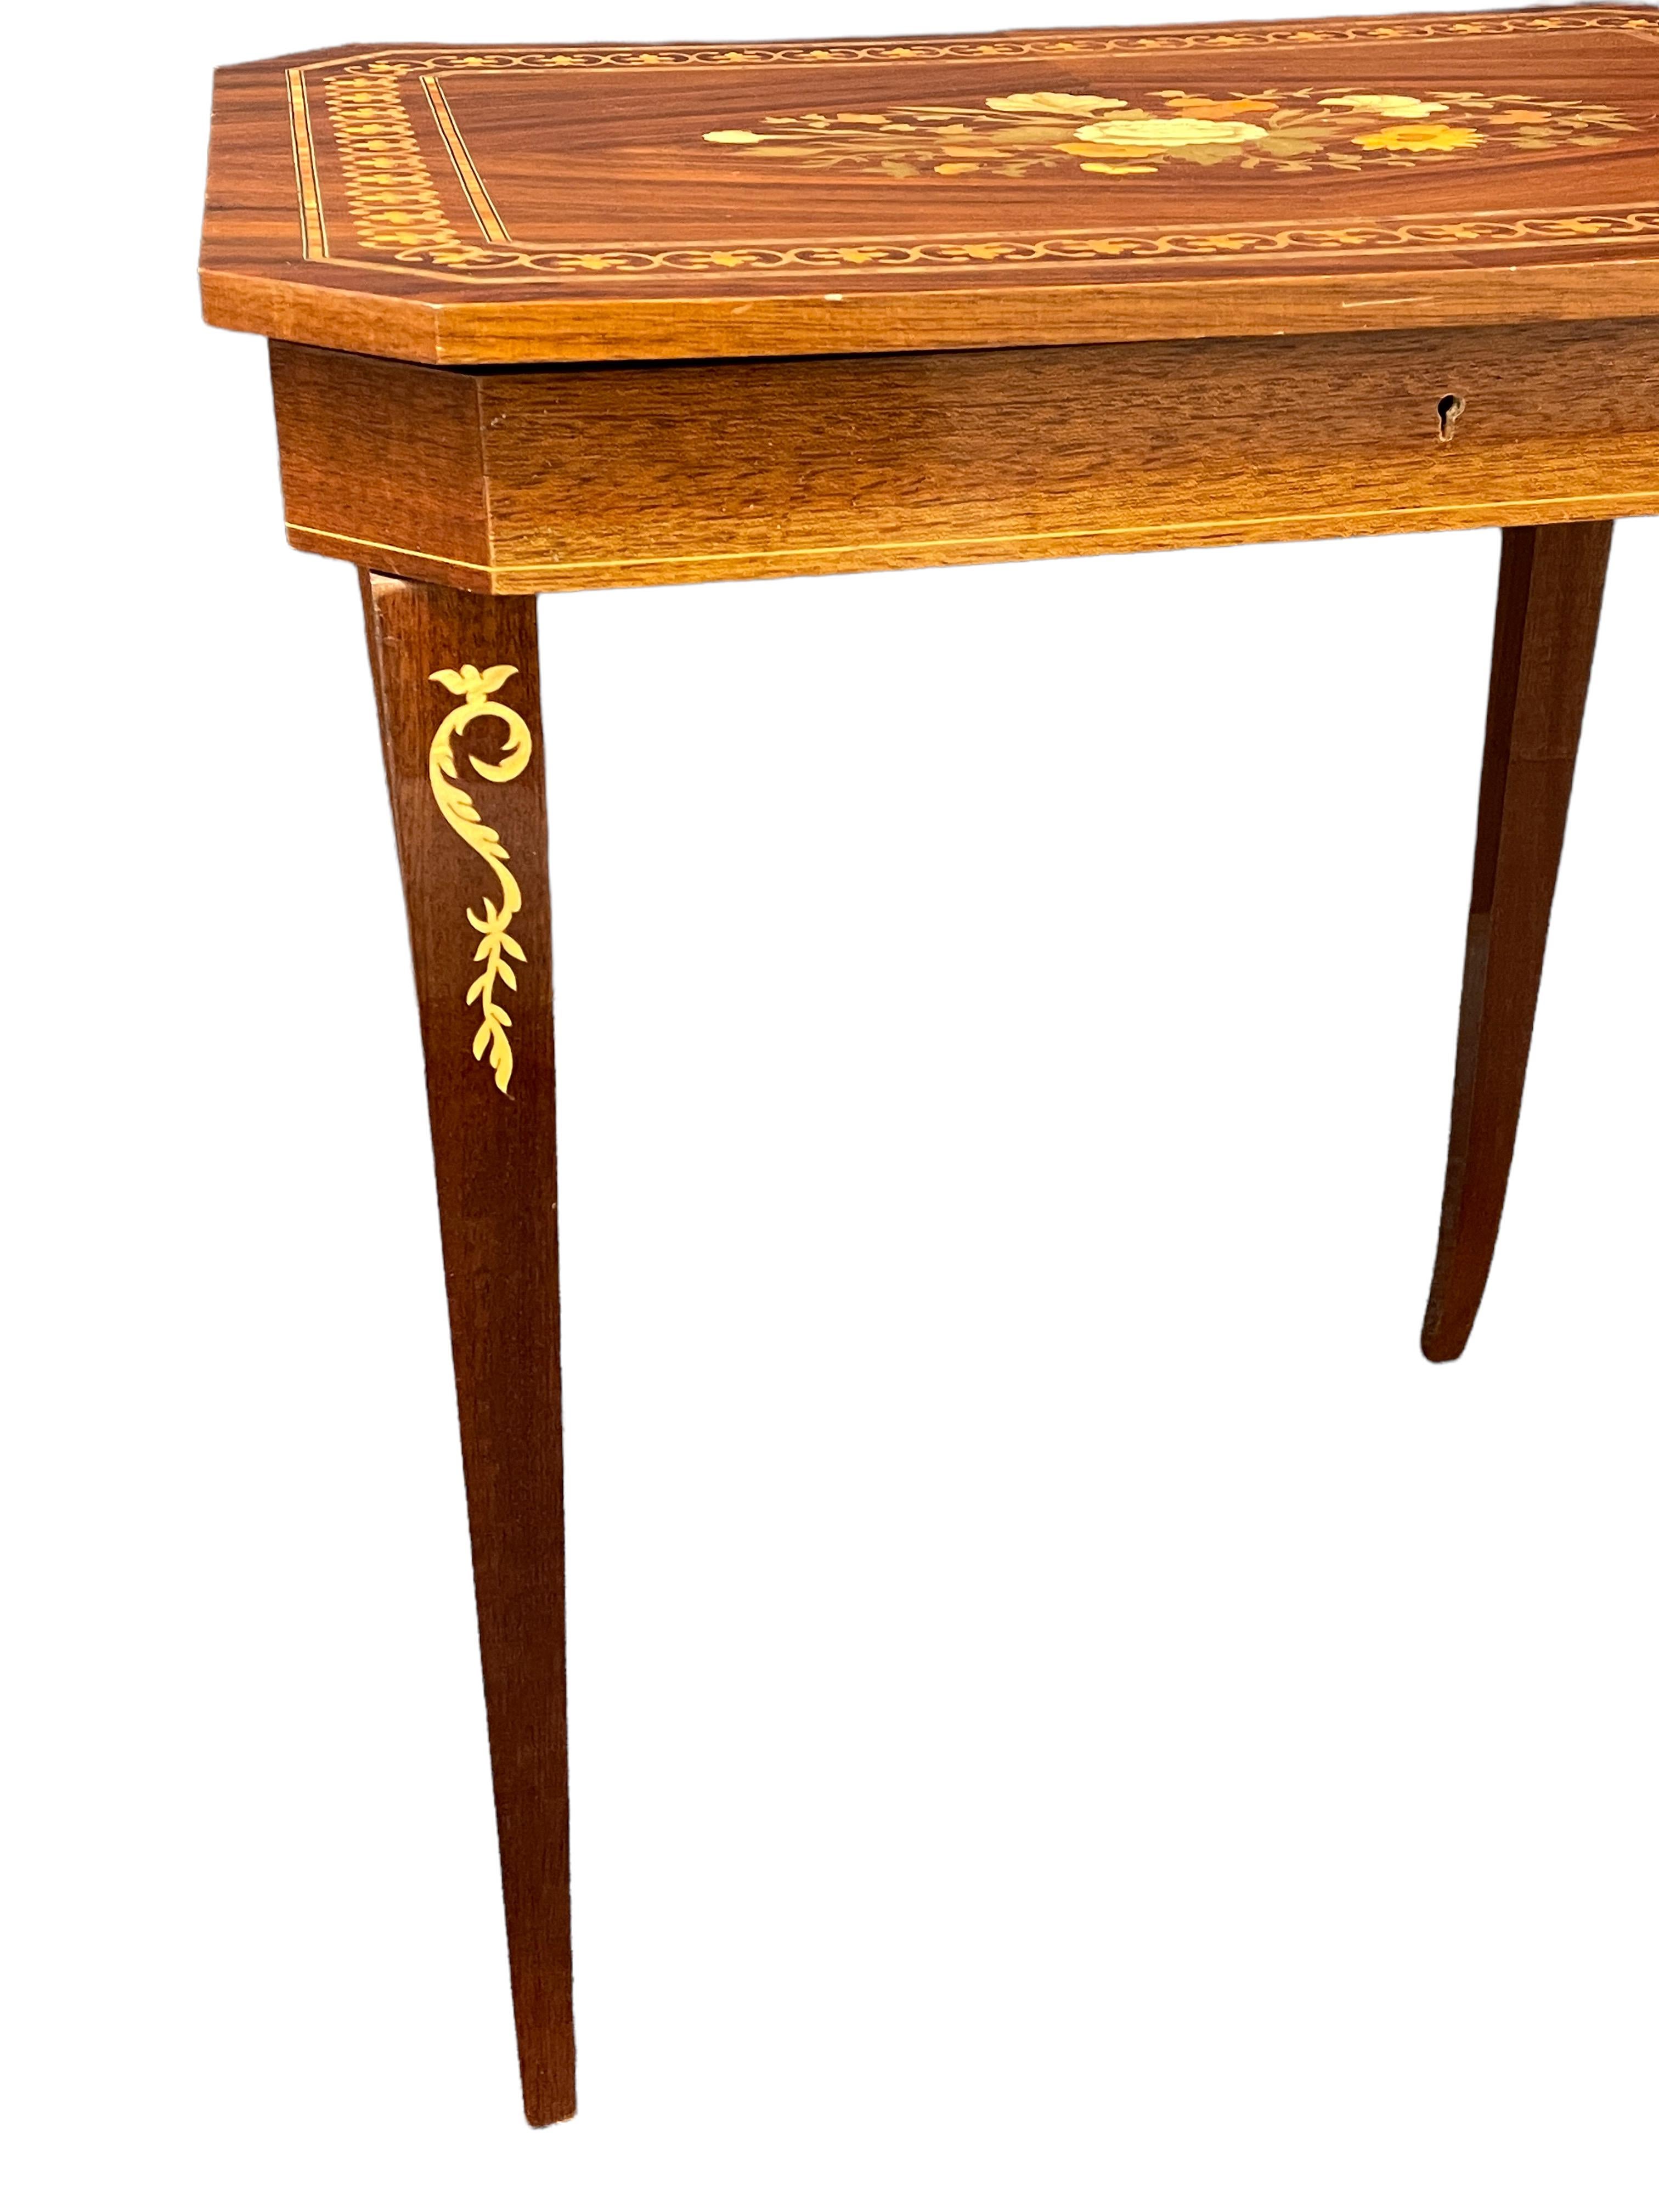 20th Century Small Inlaid Side Table with Jewelry Compartment and Music Box For Sale 5